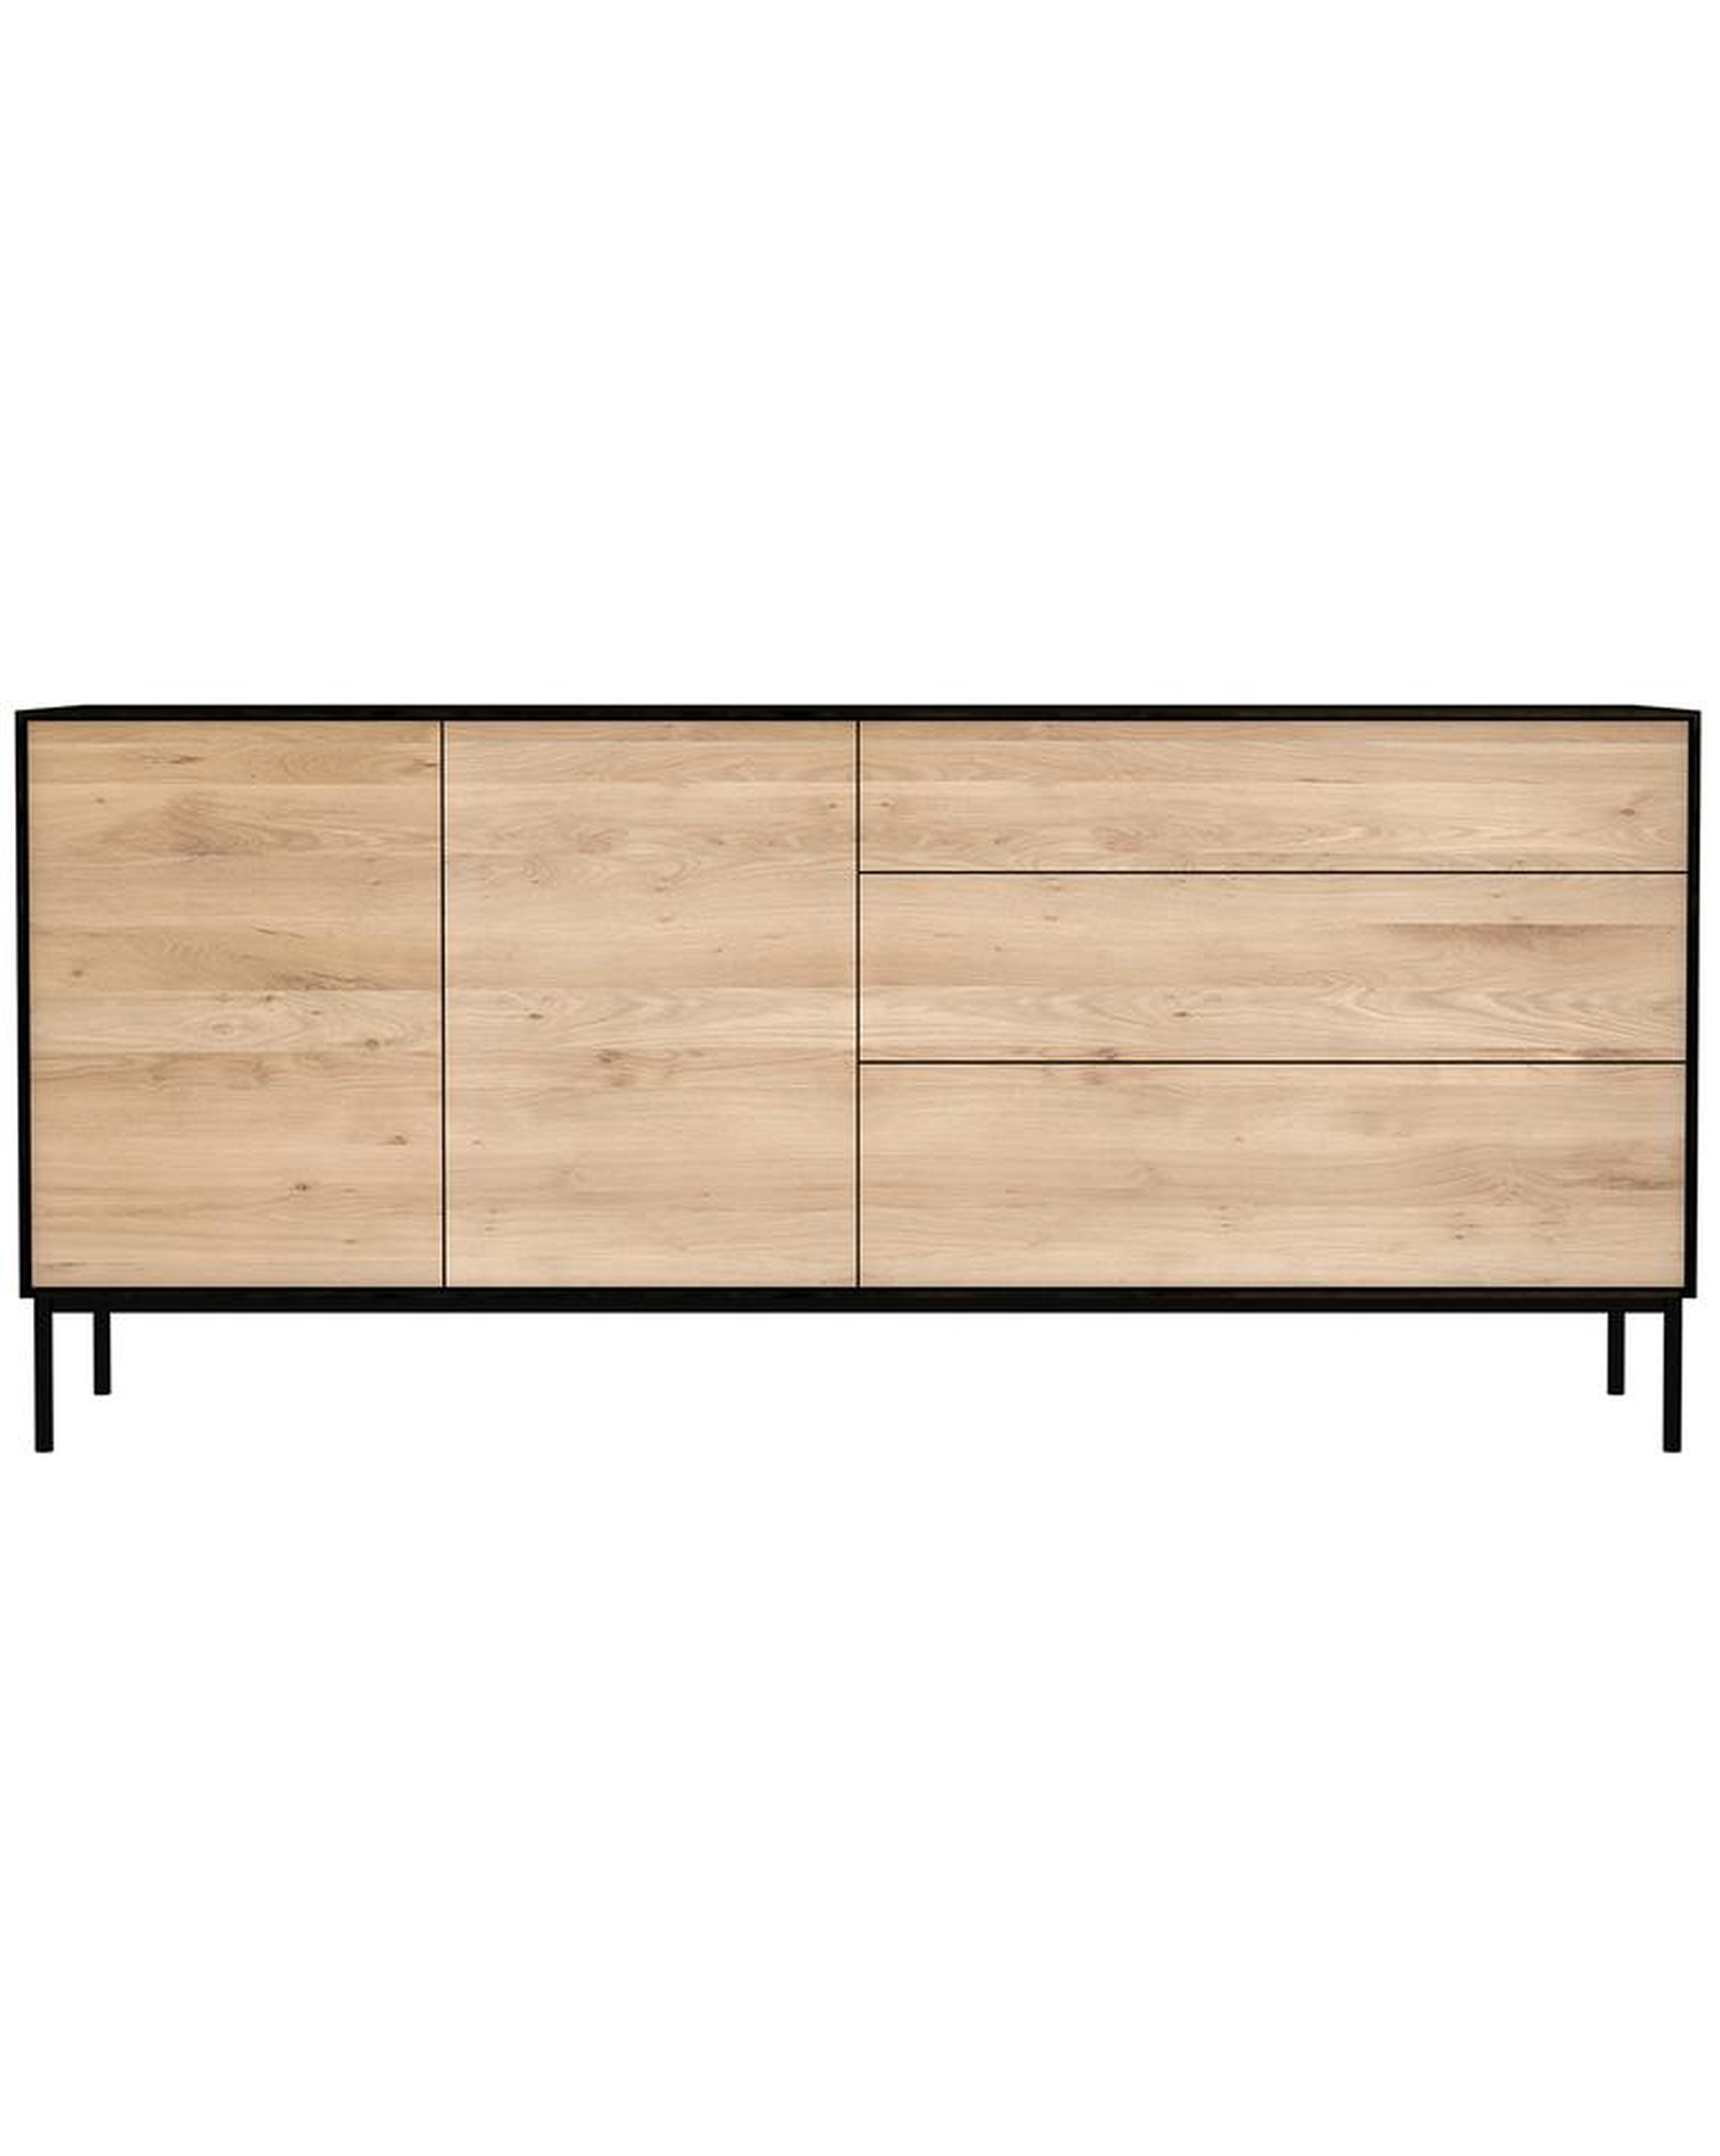 BRIT SIDEBOARD - McGee & Co.